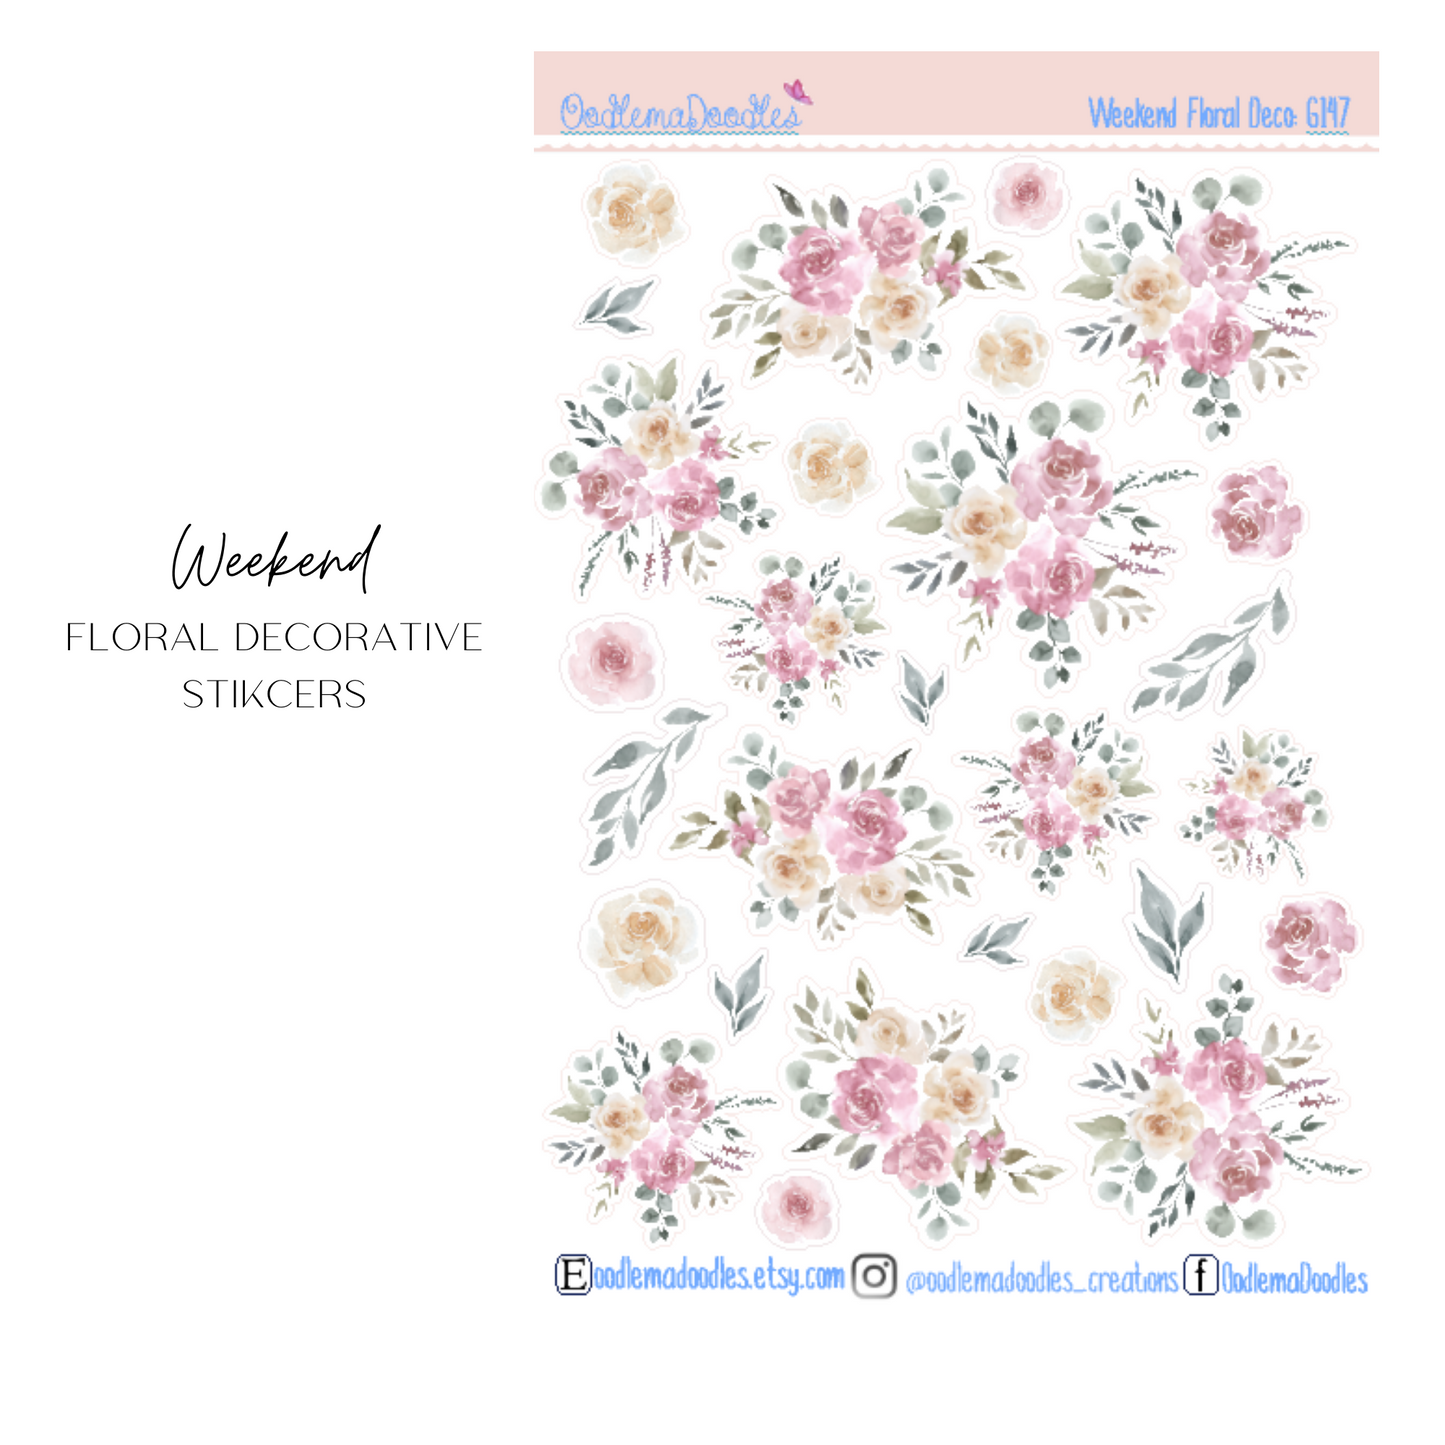 Weekend Floral Decorative Stickers